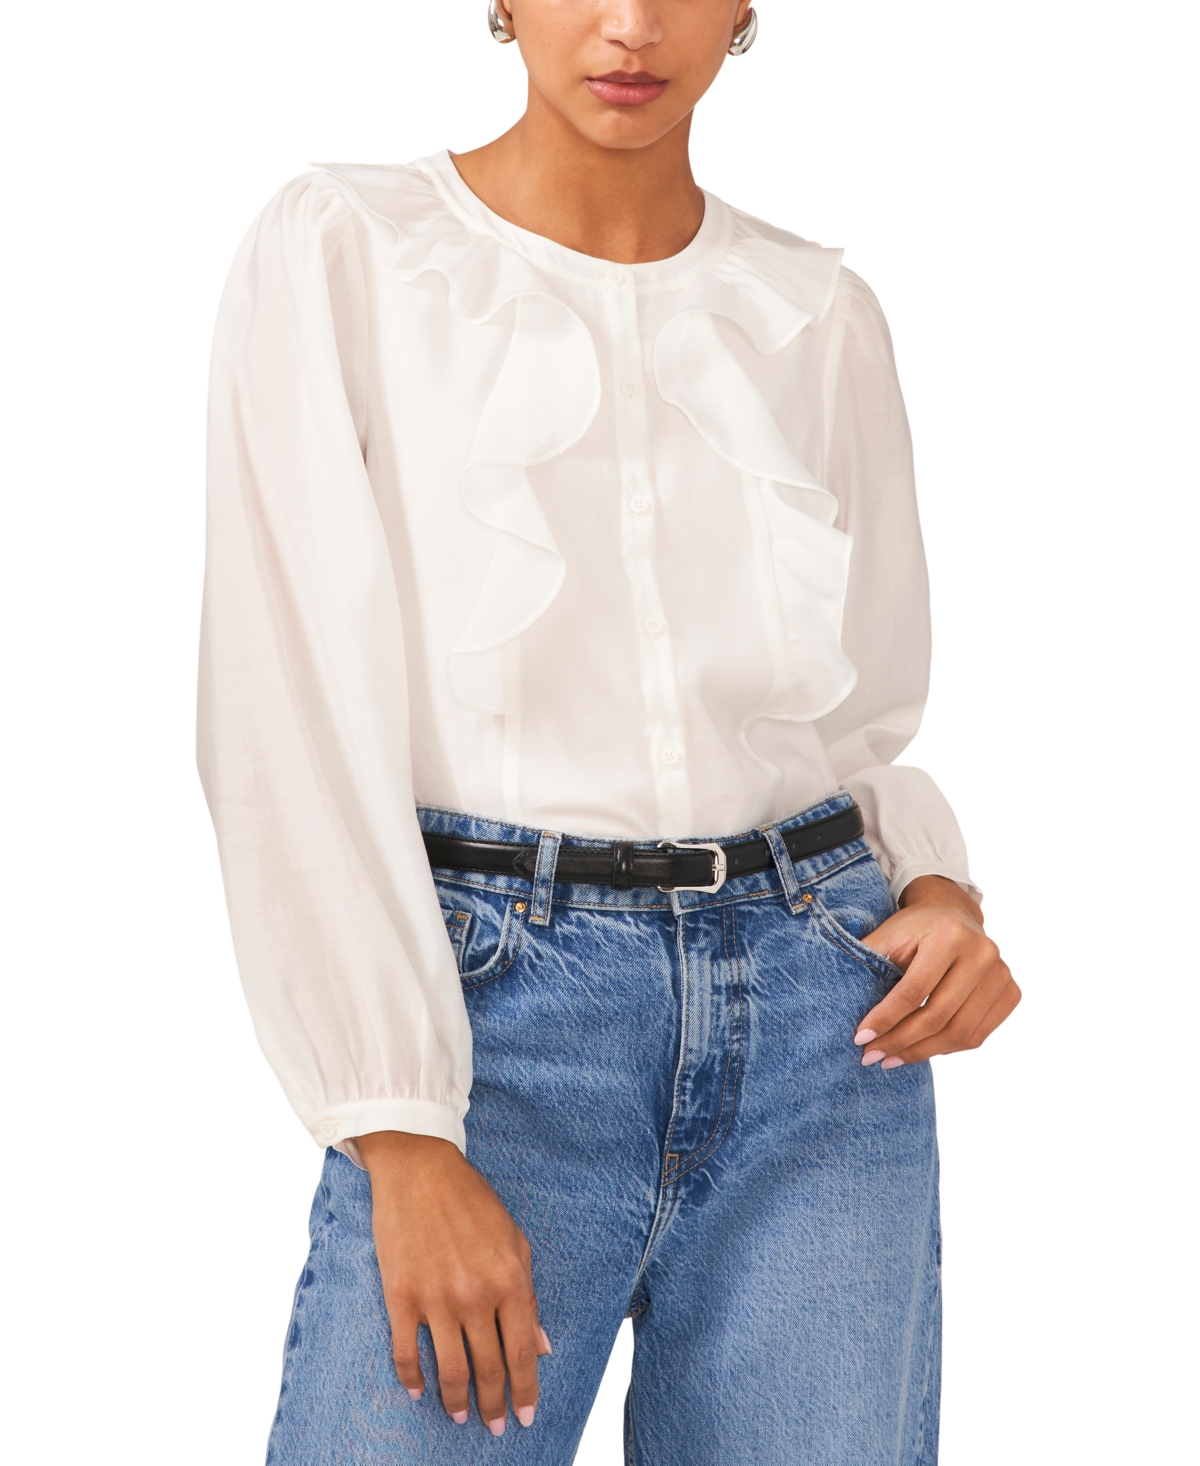 Women's Button-Front Ruffle Blouse - New Ivory